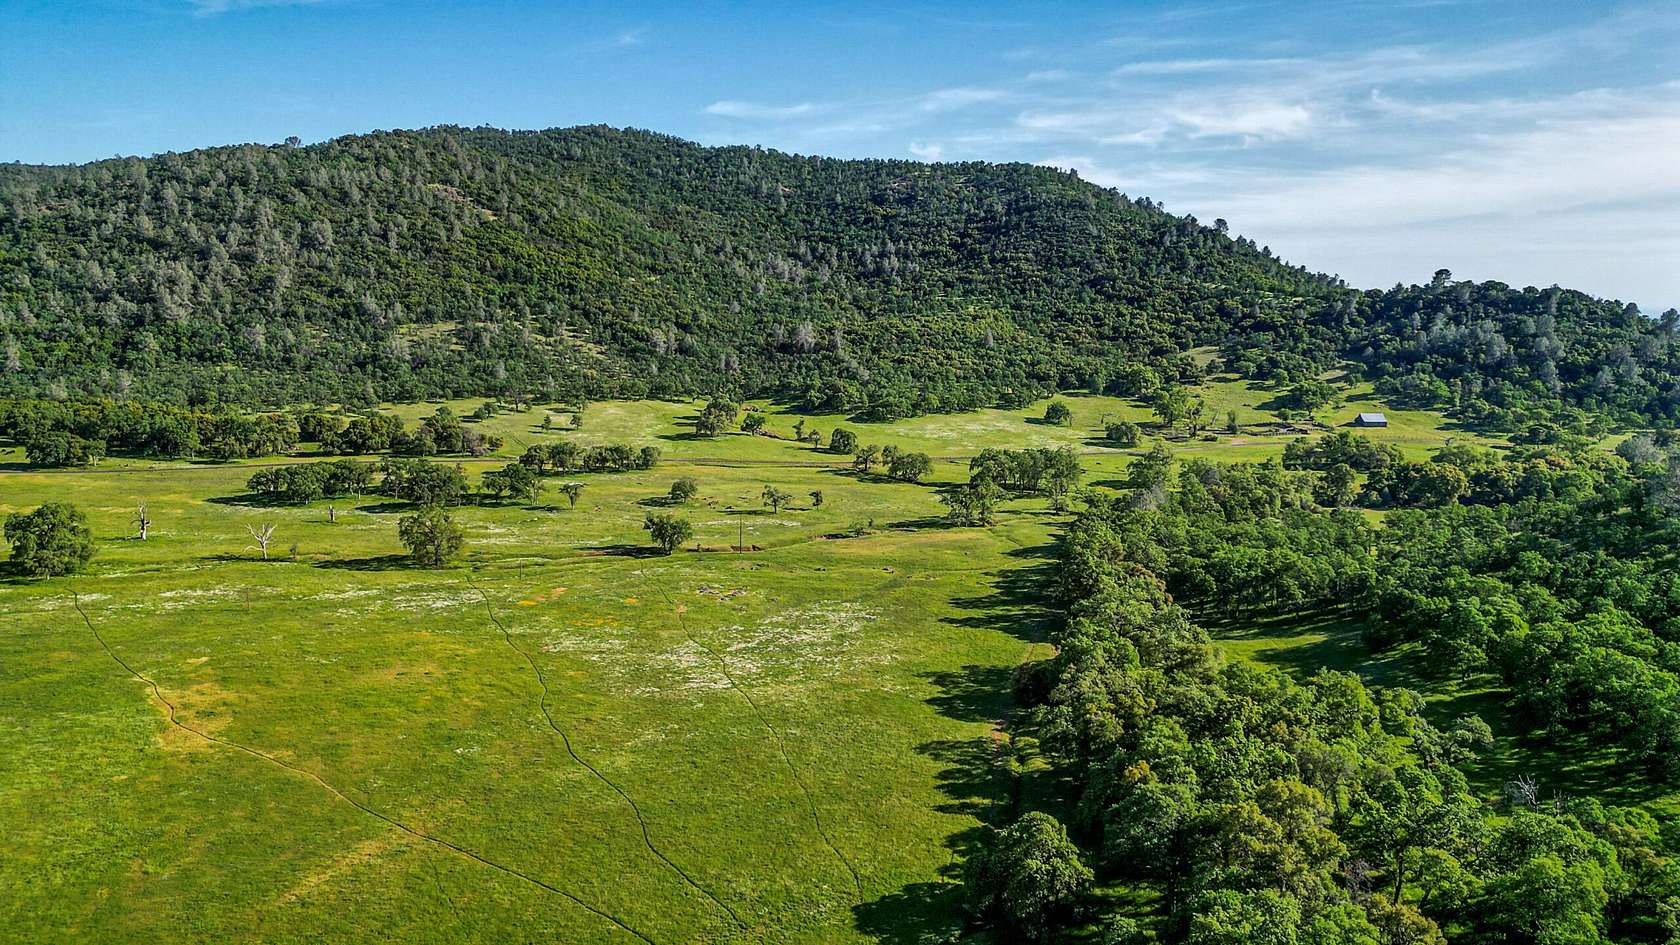 961 Acres of Recreational Land for Sale in Coulterville, California